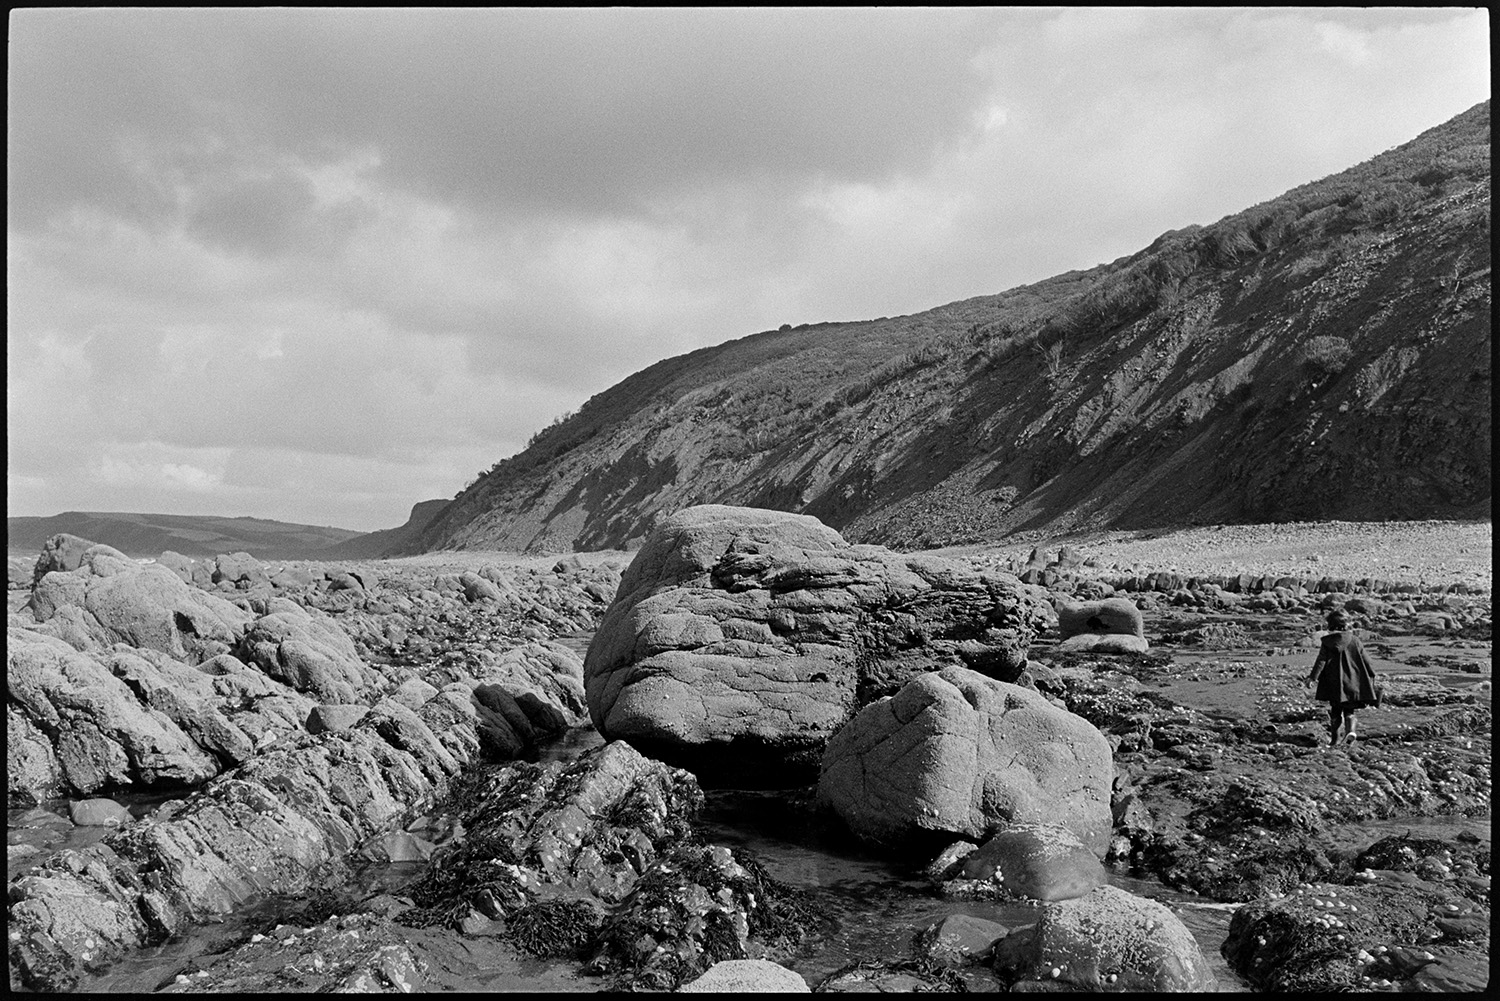 Seaside, beach with shells on rocks, limpets. 
[A person walking past rocks on the seashore or beach at Bucks Mills. Cliffs can be seen in the background.]